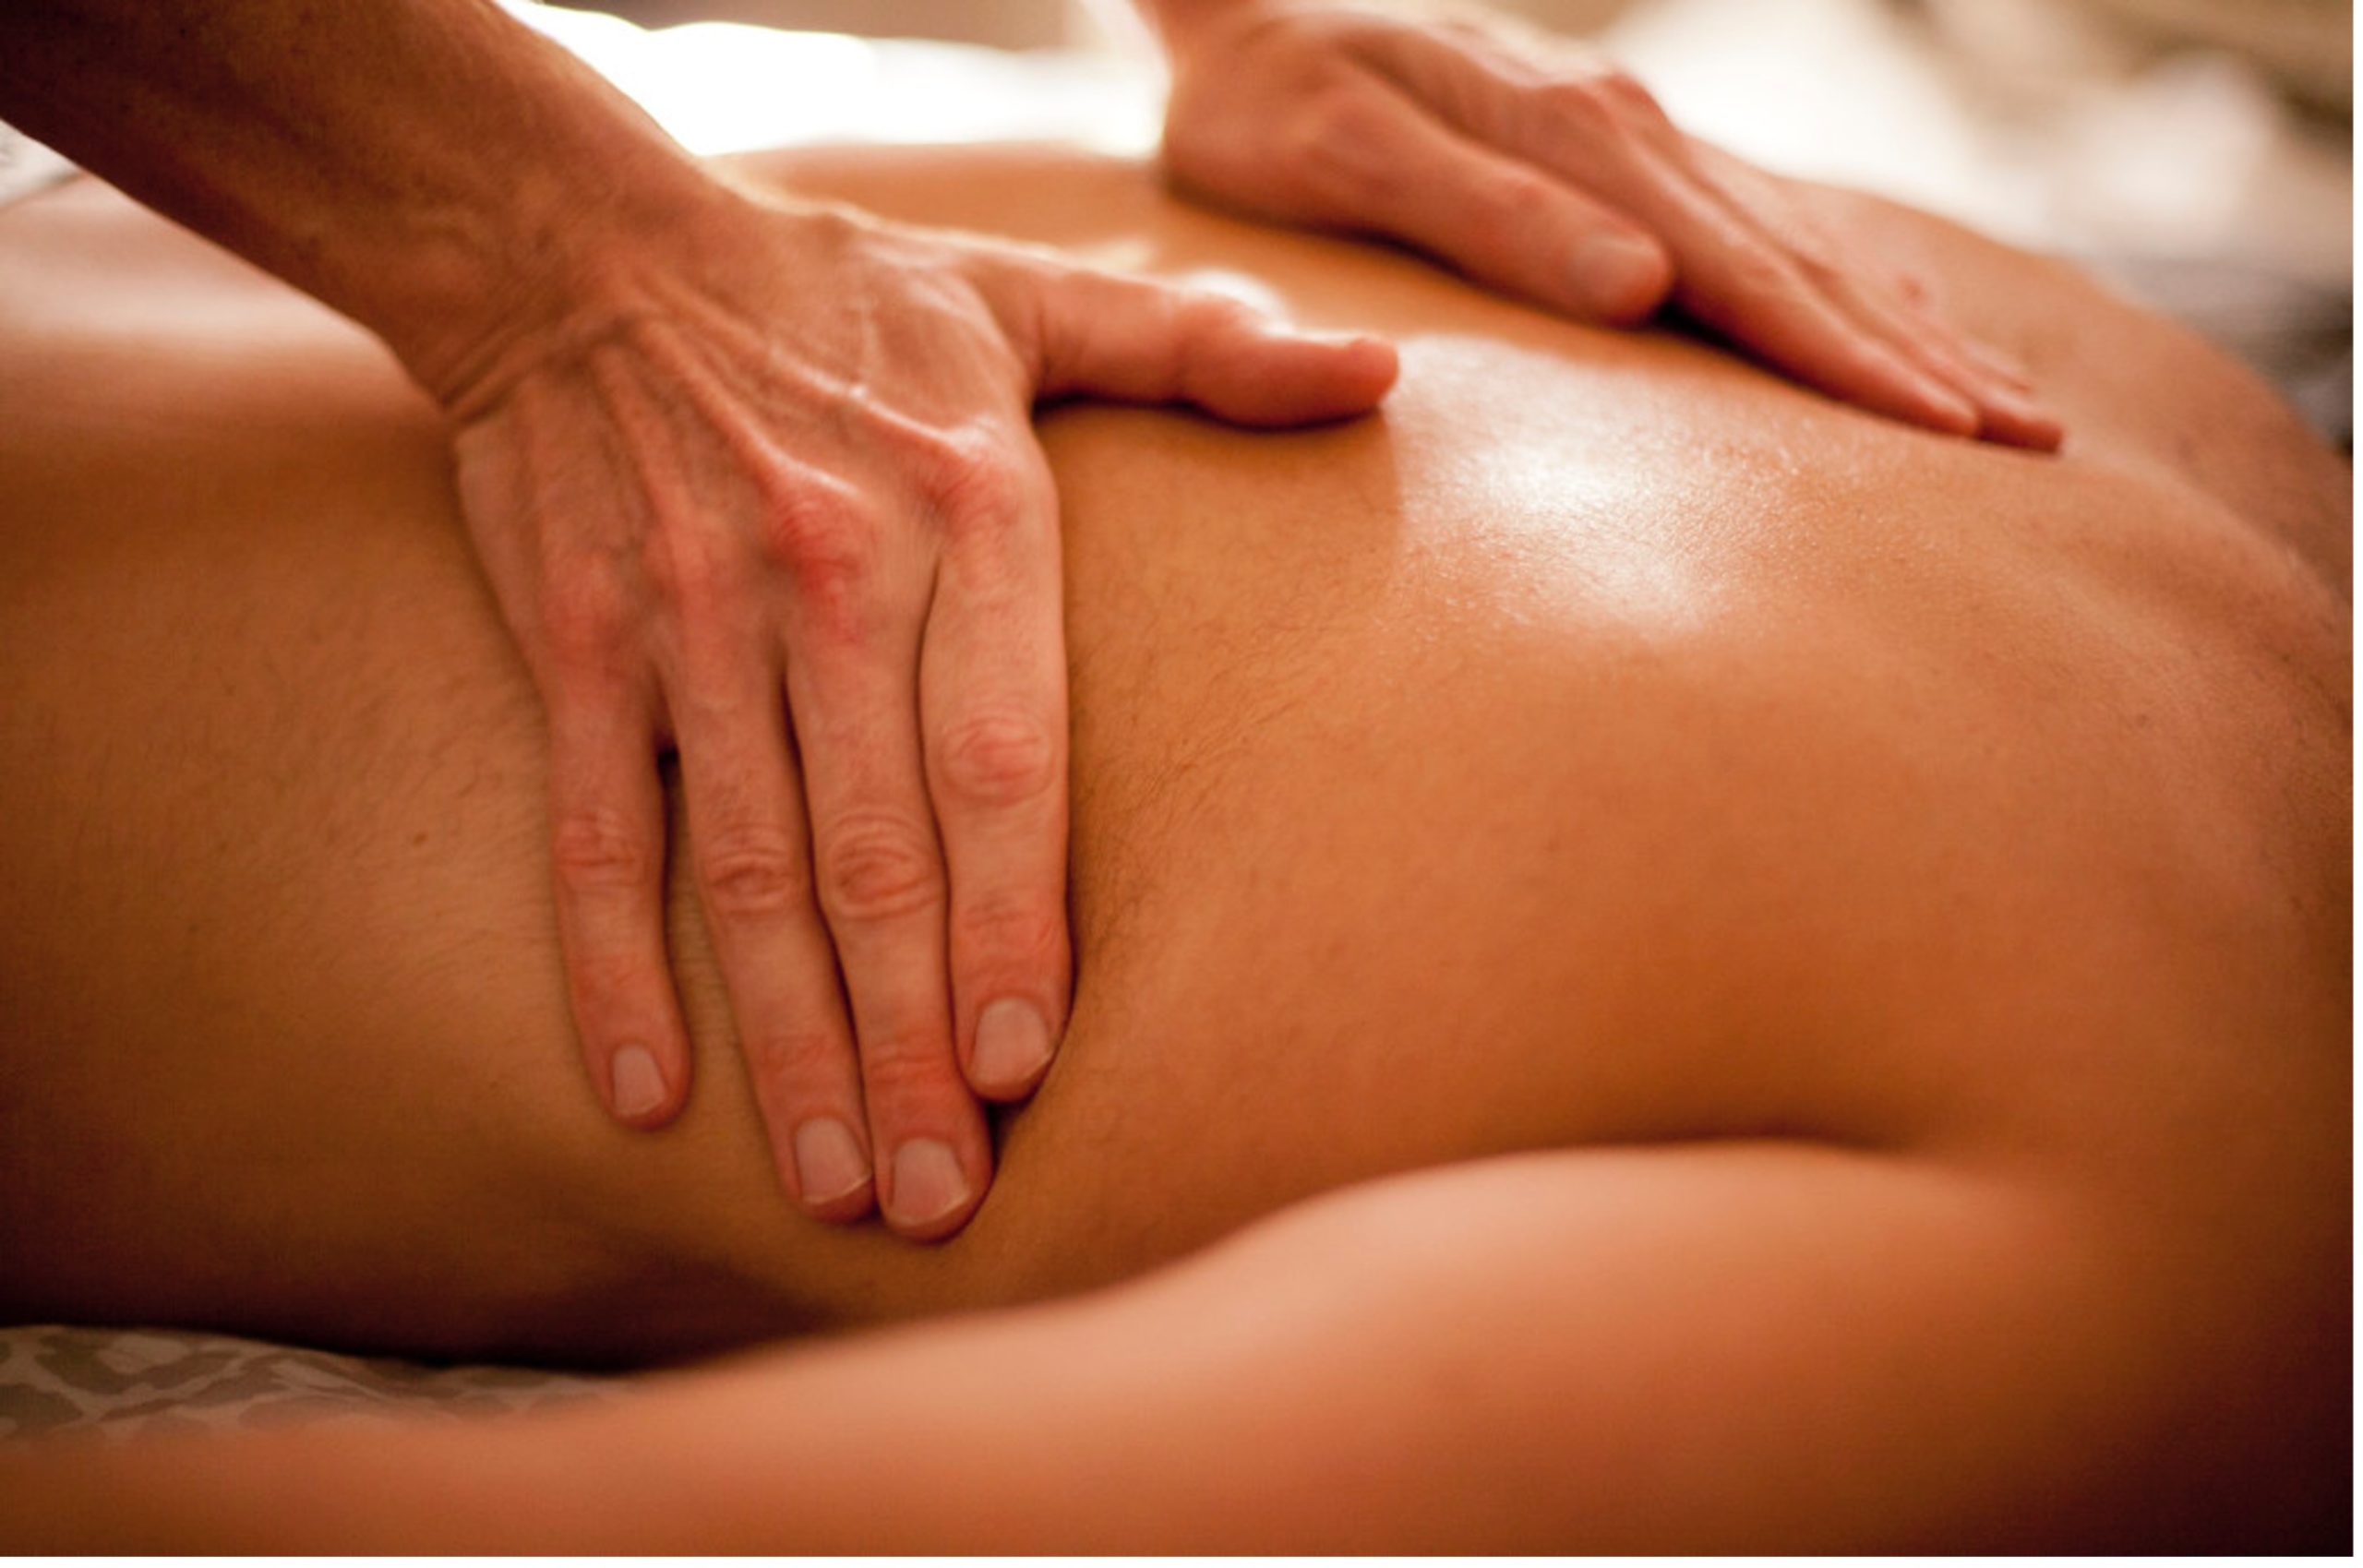 Can Massage Therapy Help Facilitate Weight-Loss?